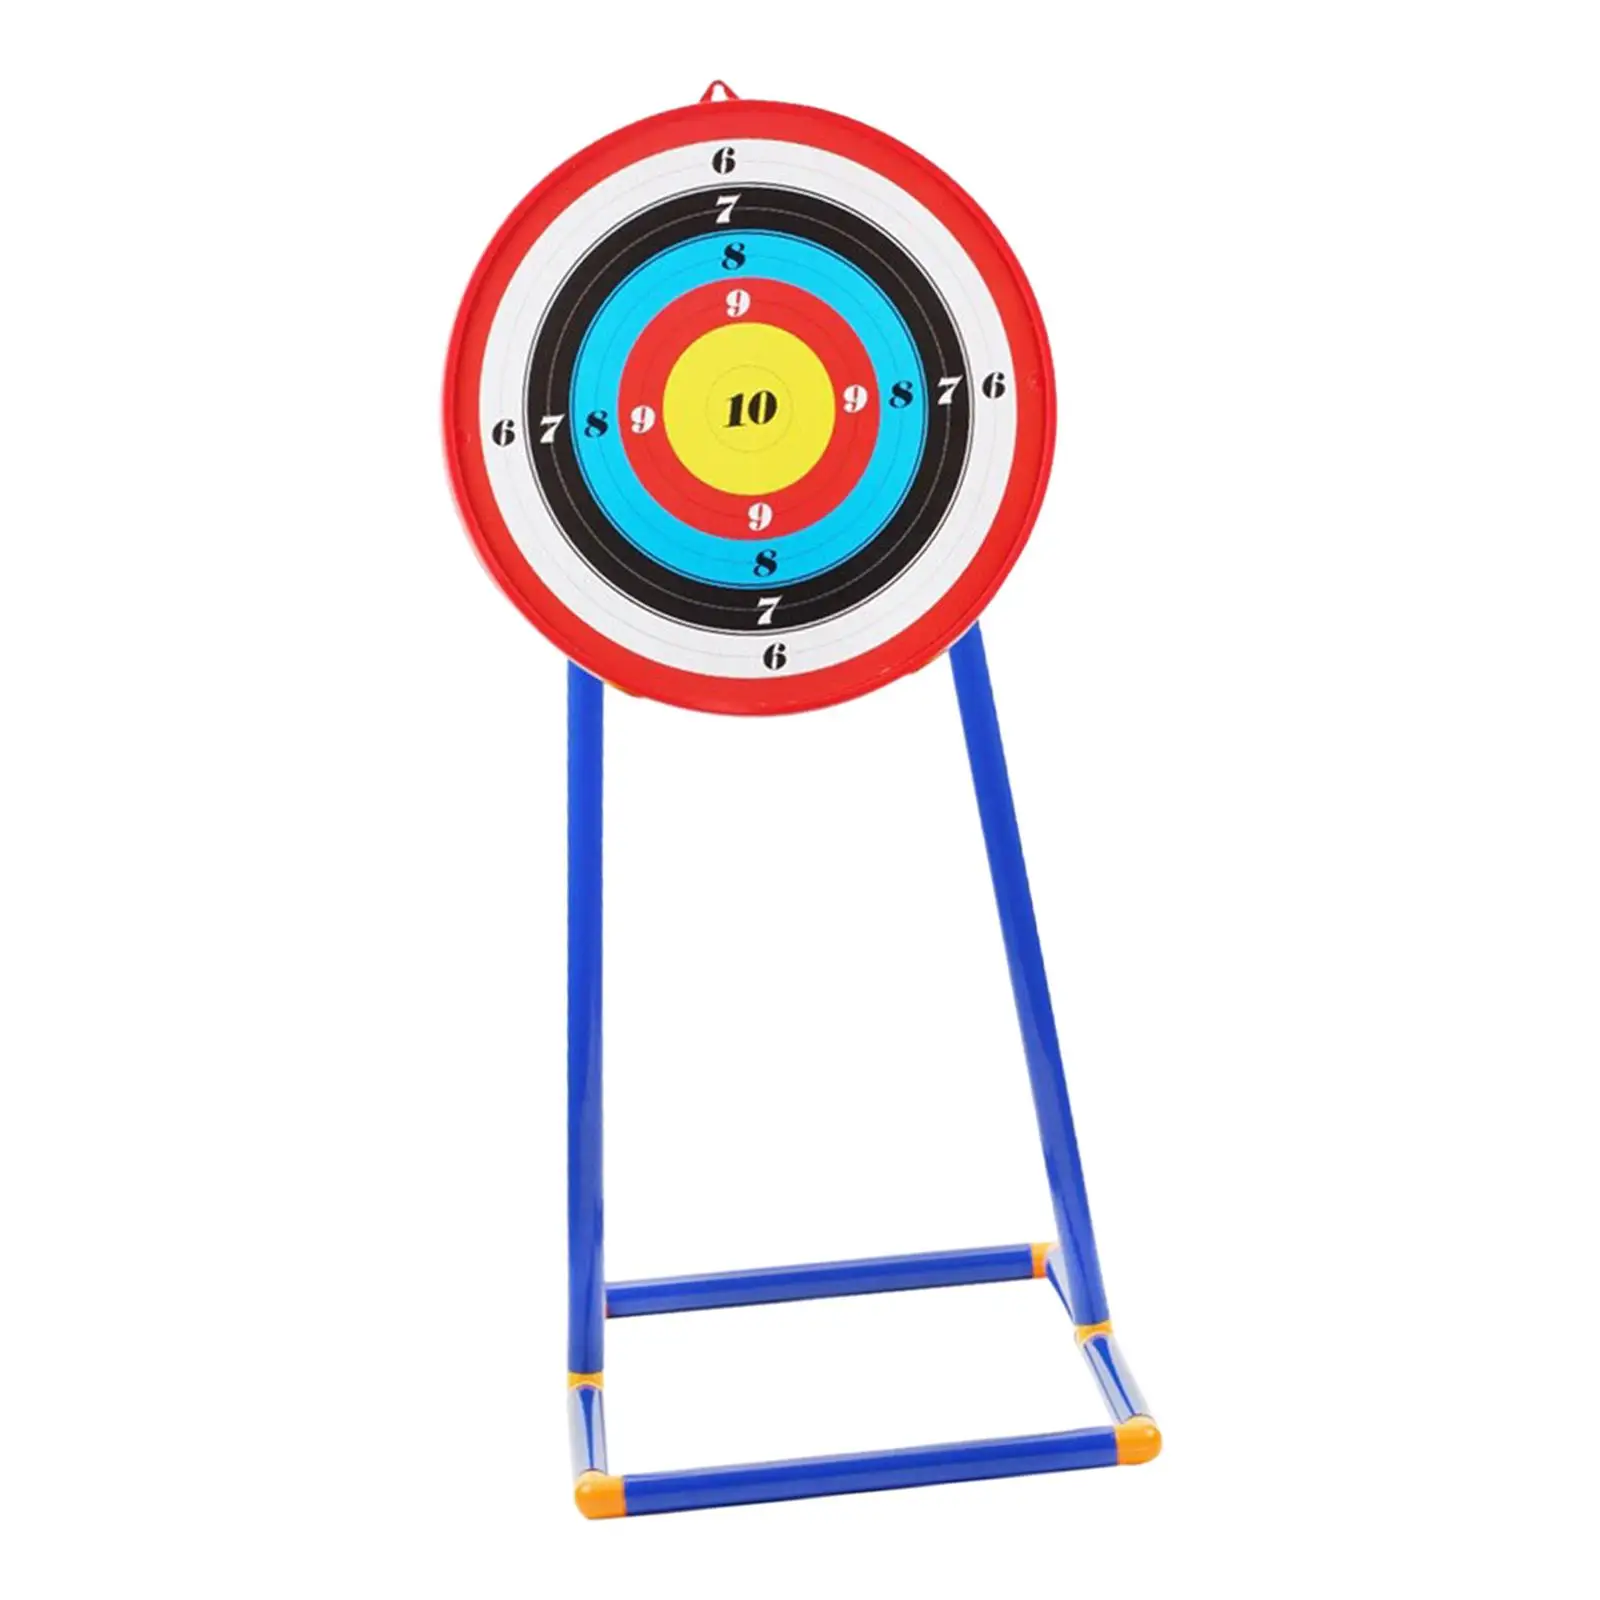 Standing Target Easy to Use Kids Suction Cup Indoor Outdoor Hanging Target